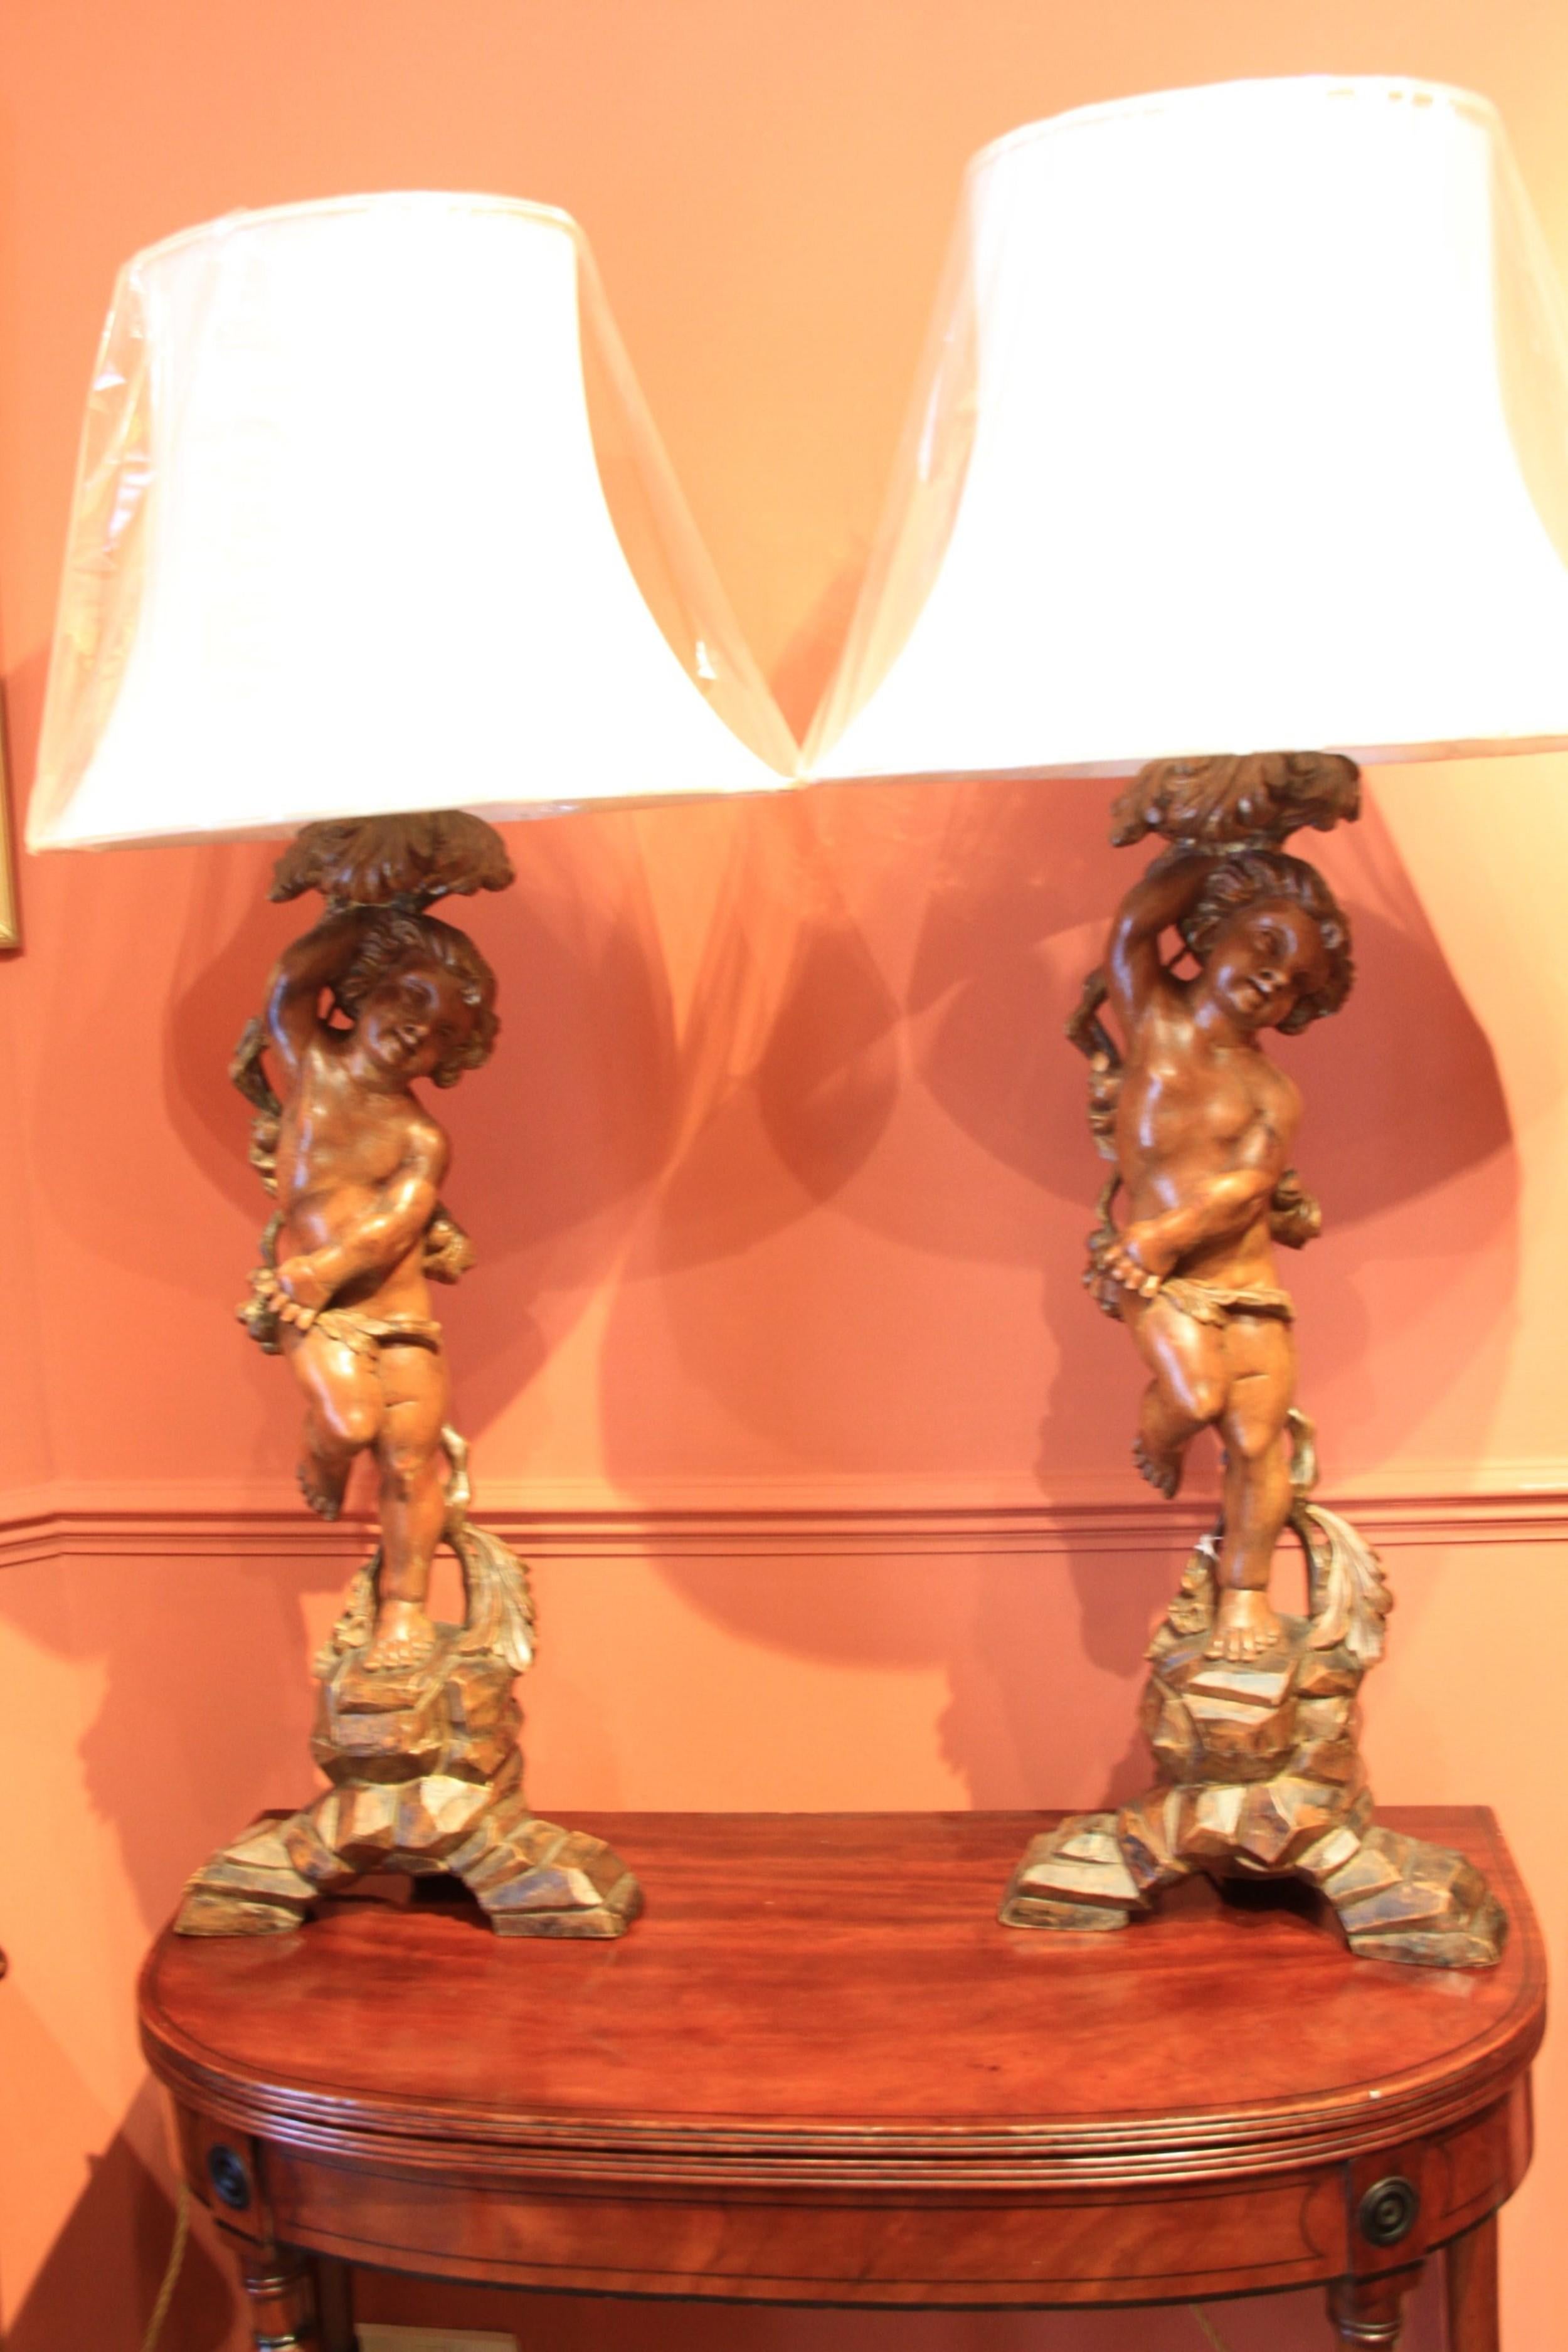 A highly decorative near pair of large impressive hand carved pine table lamps in the form of cherubs gathering grapes off a vine and standing on rock formed bases complete with a pair of cream silk oval shades.(new)

Measure: 107cm H including